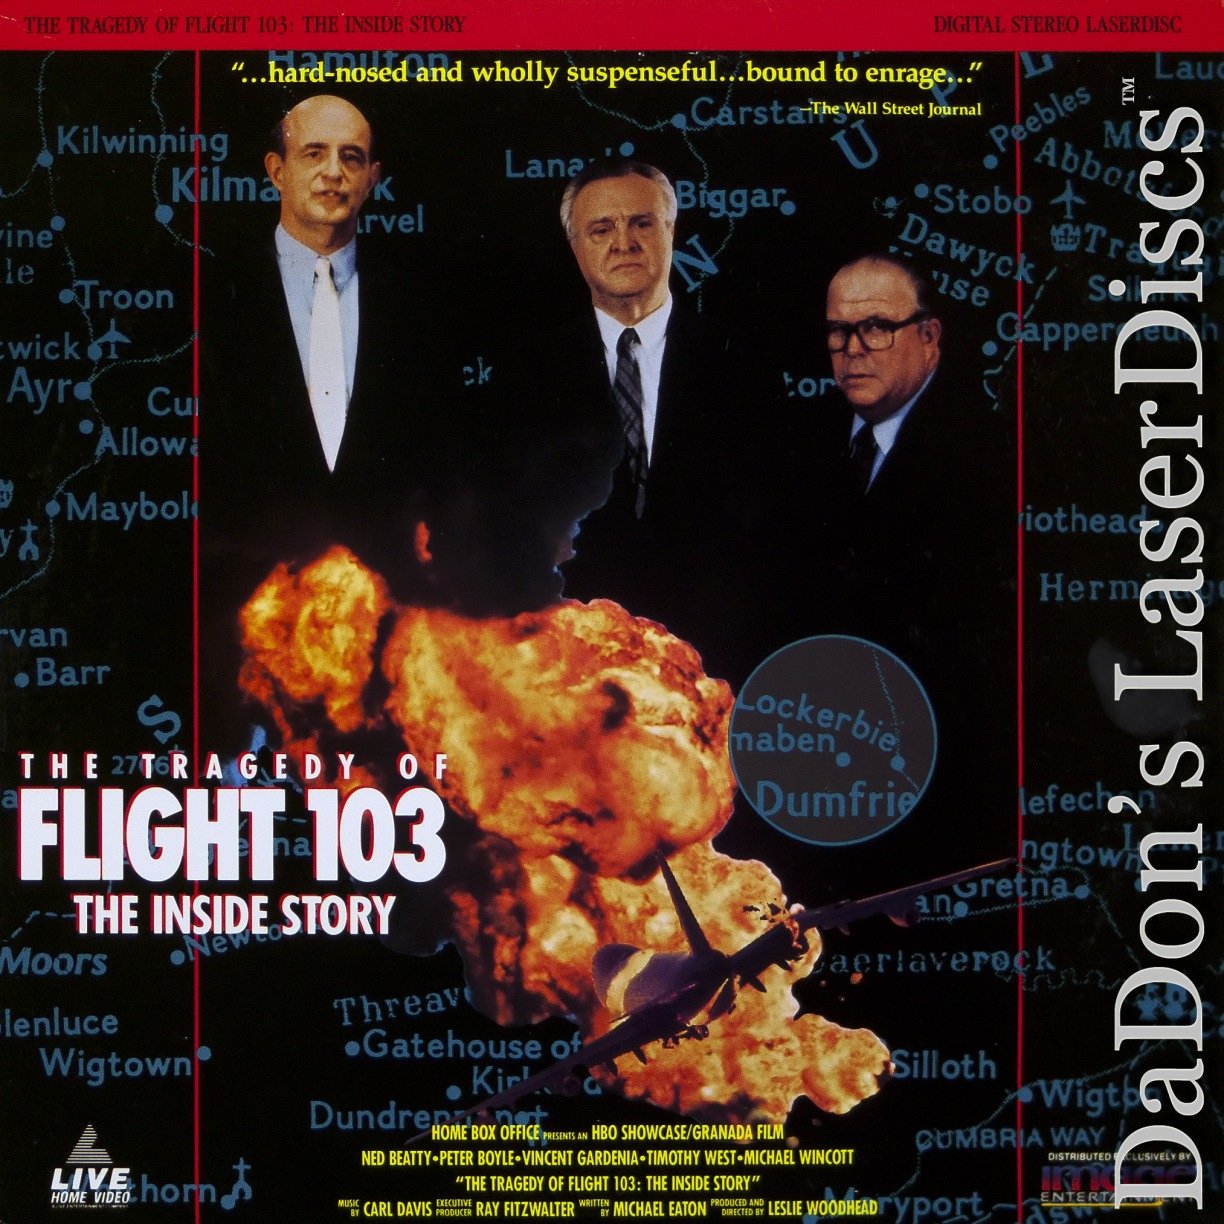 The Tragedy of Flight 103: The Inside Story (1990) Screenshot 1